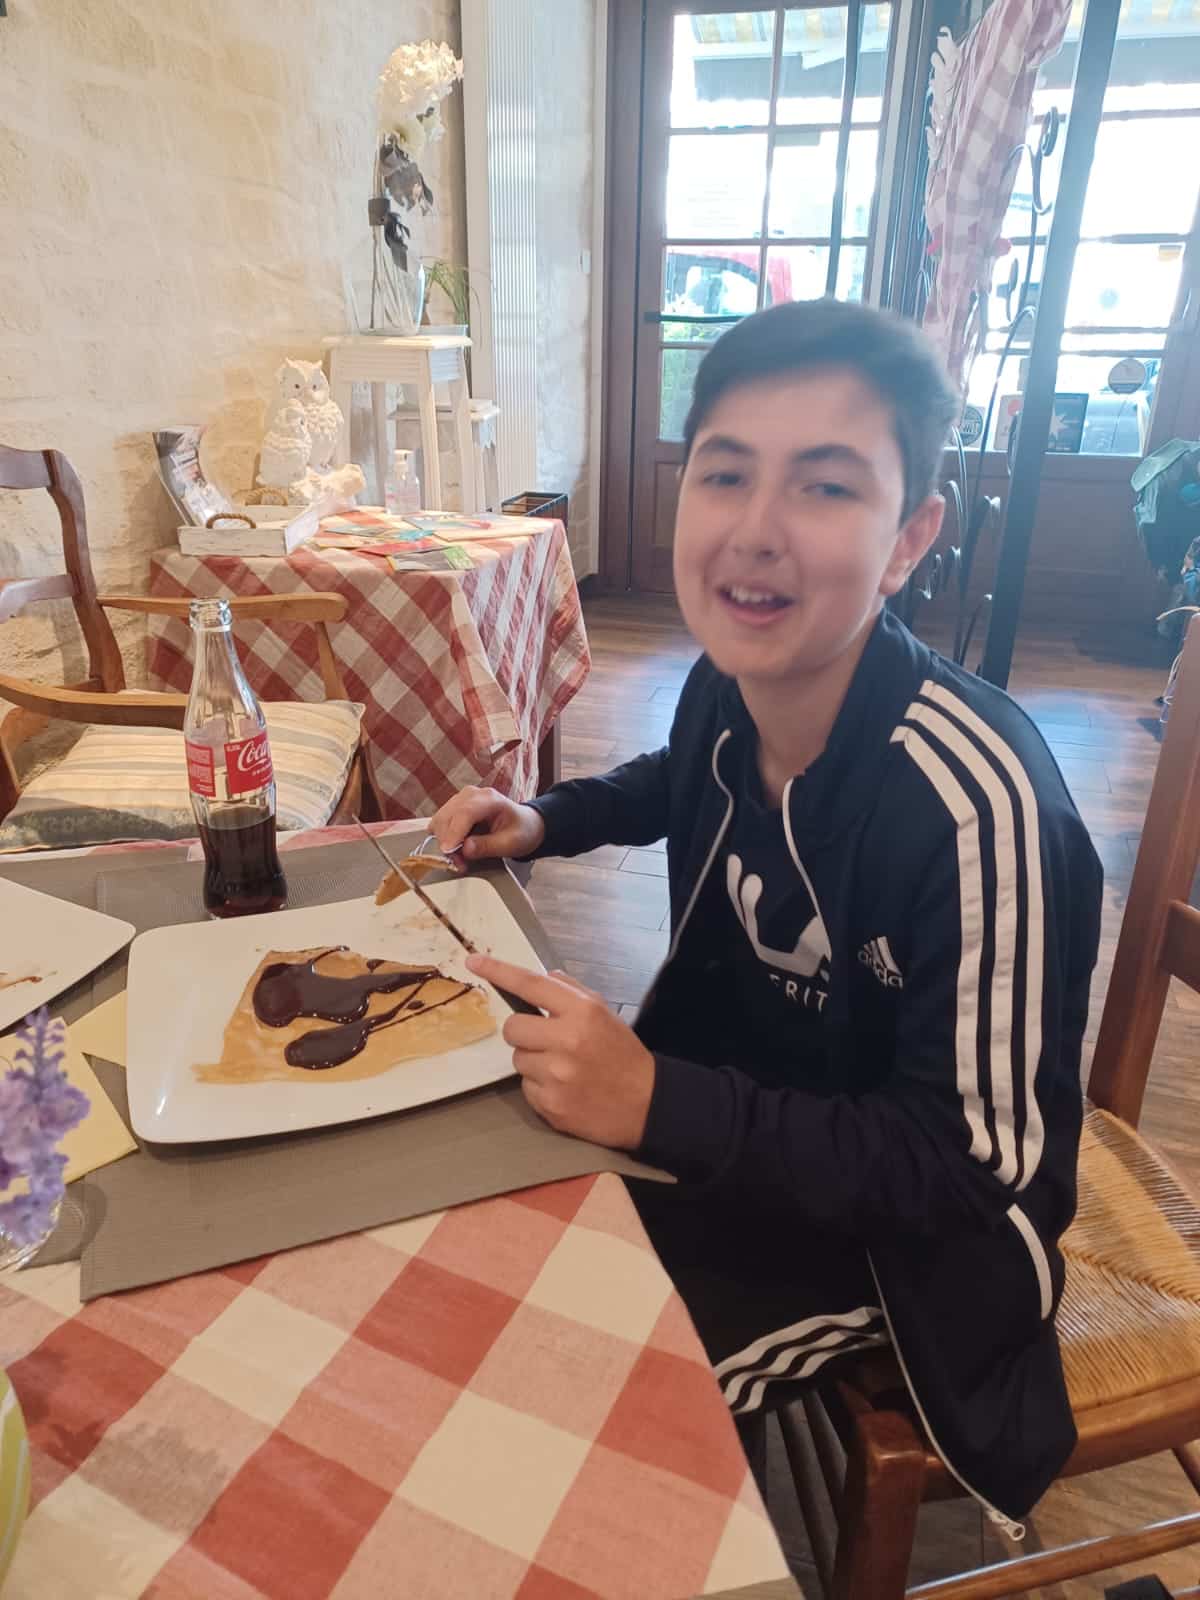 Eating crepes in France